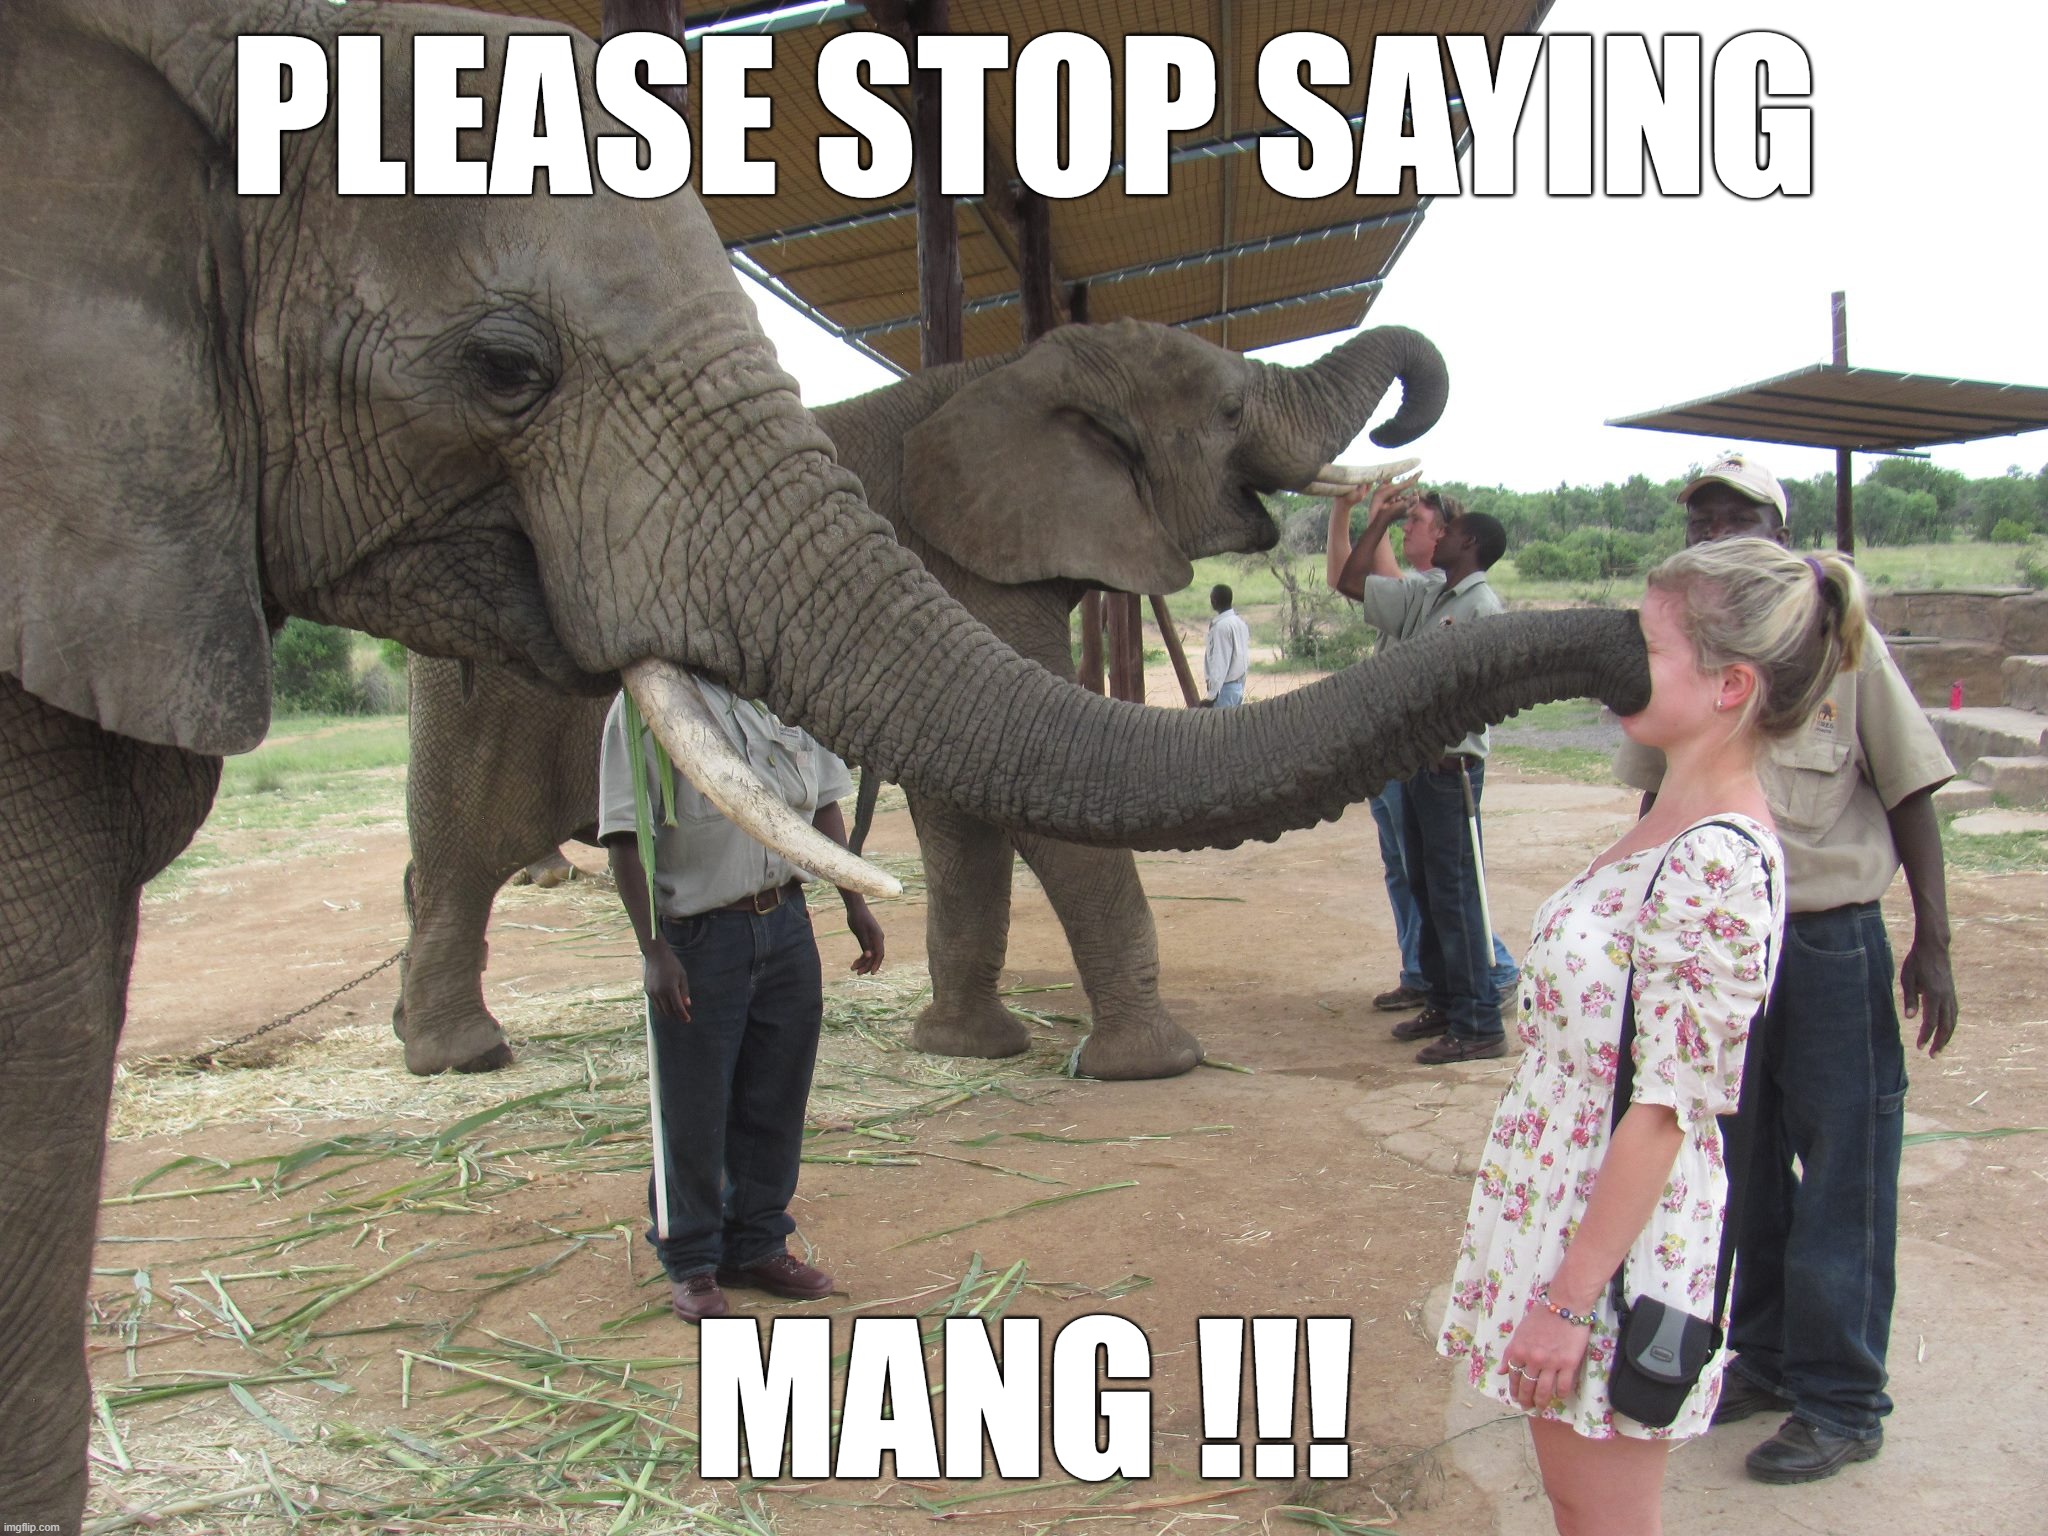 Please Stop Saying Mang! |  PLEASE STOP SAYING; MANG !!! | image tagged in elephant wants you to,fun,please stop,mang,words | made w/ Imgflip meme maker